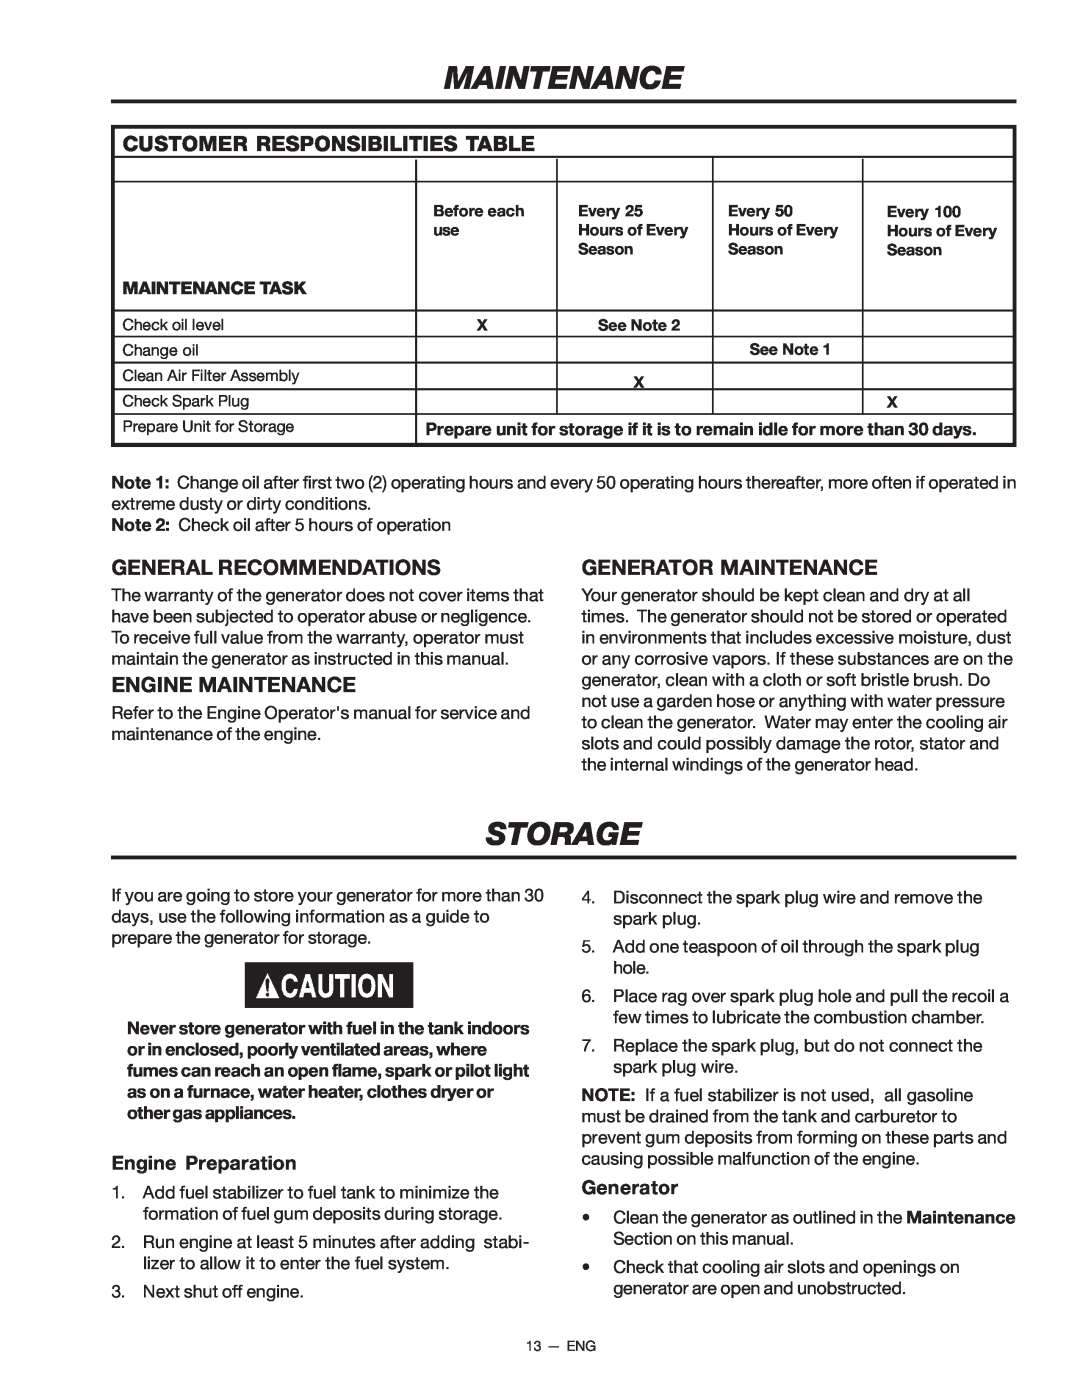 Porter-Cable D21679-008-0 instruction manual Maintenance, Storage, Customer Responsibilities Table, General Recommendations 